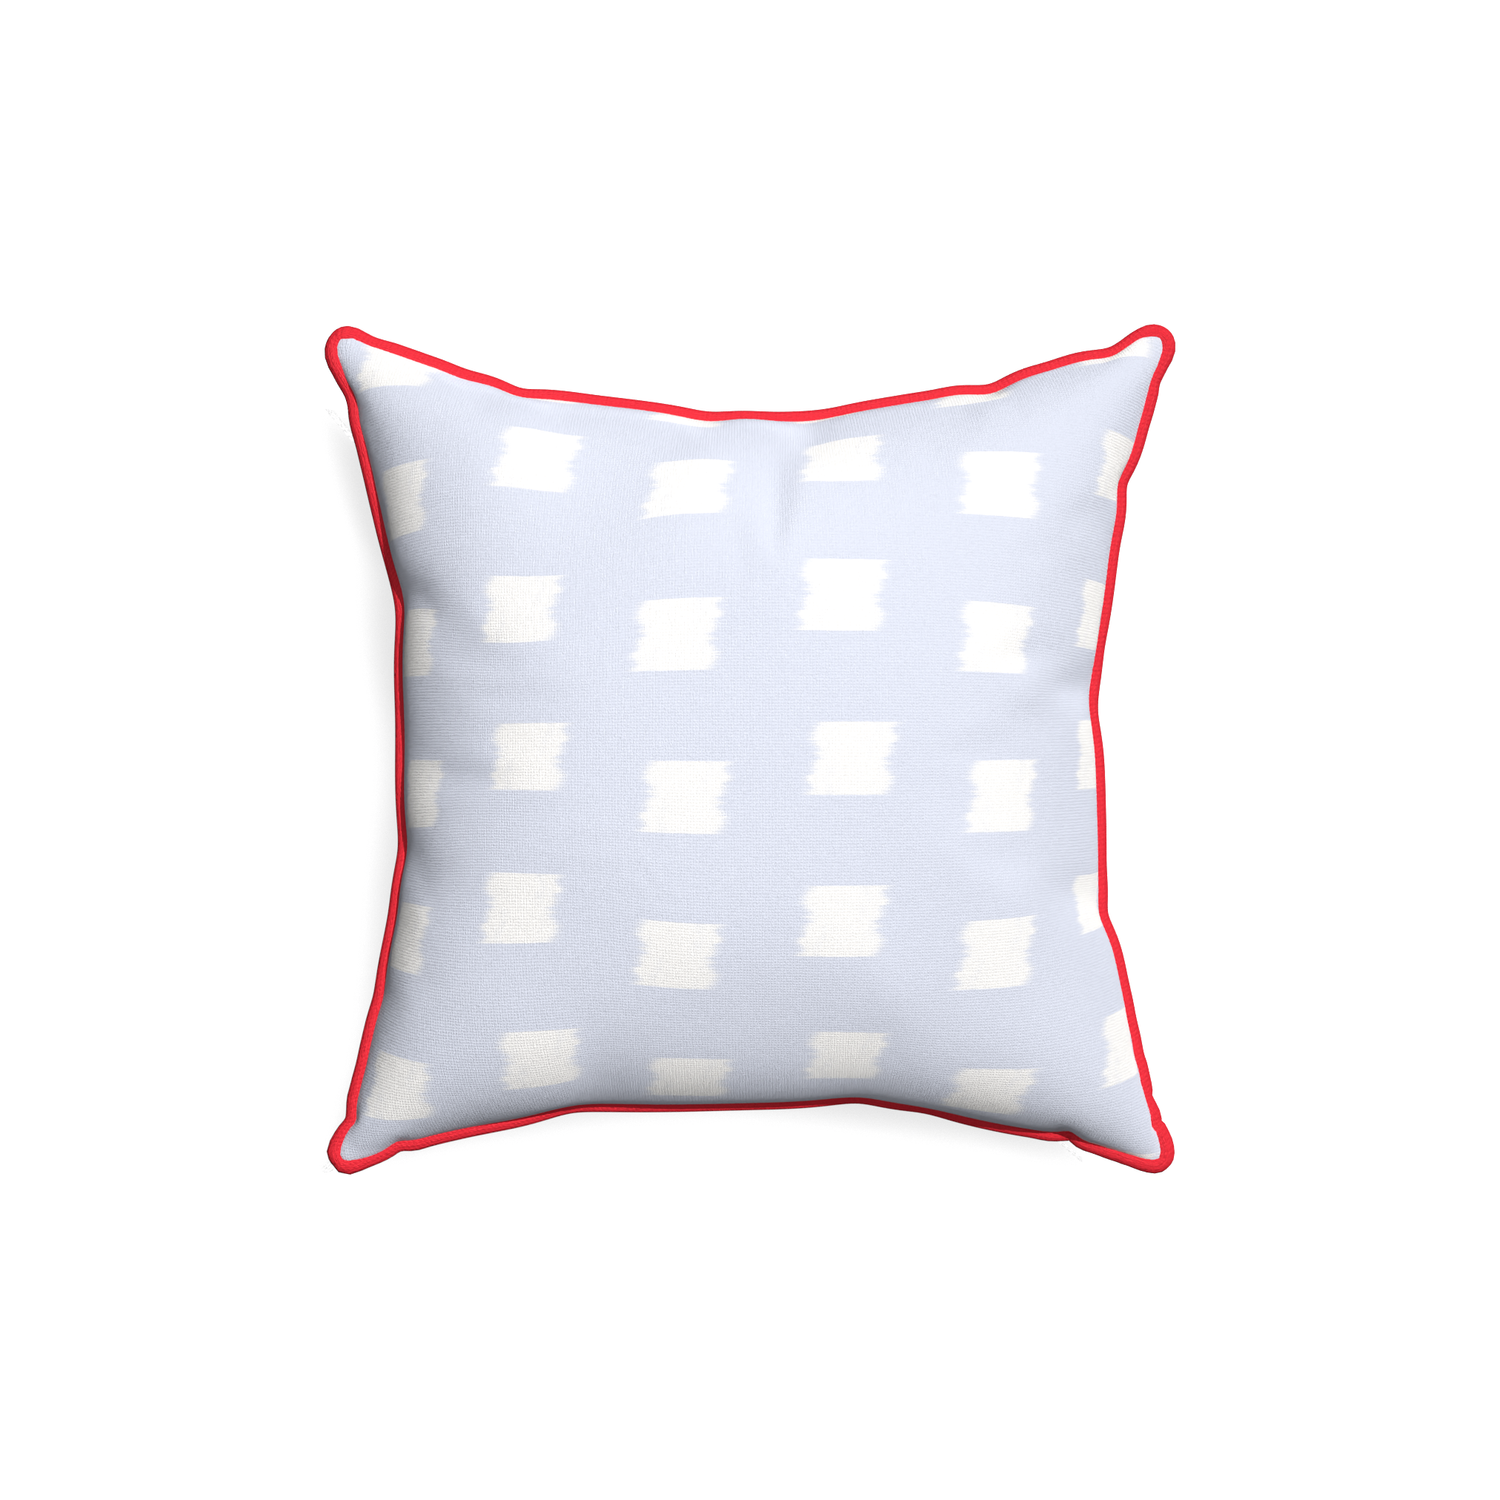 18-square denton custom pillow with cherry piping on white background